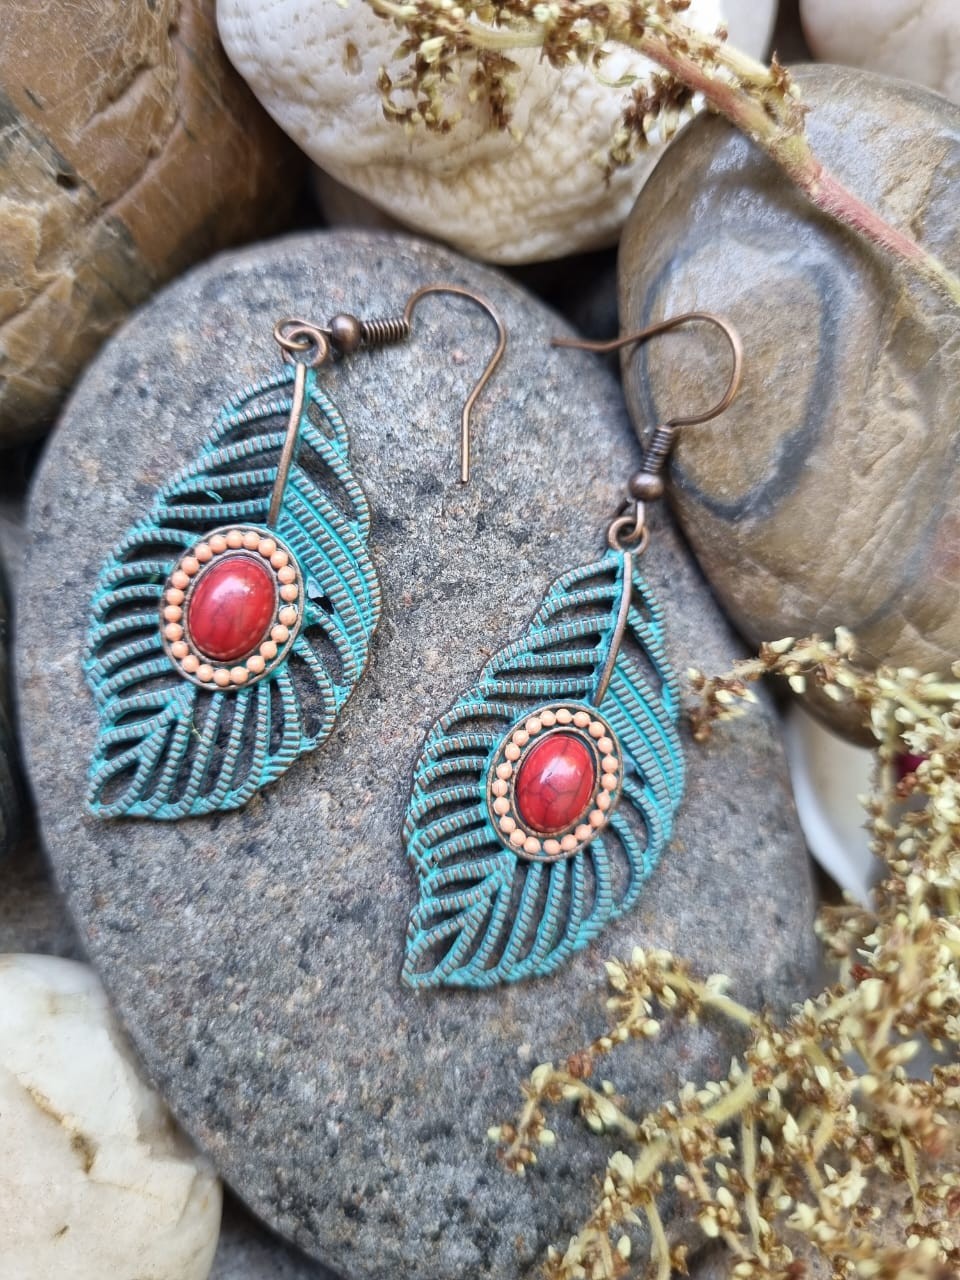 Bohemian style metal dangle earrings with a red stone